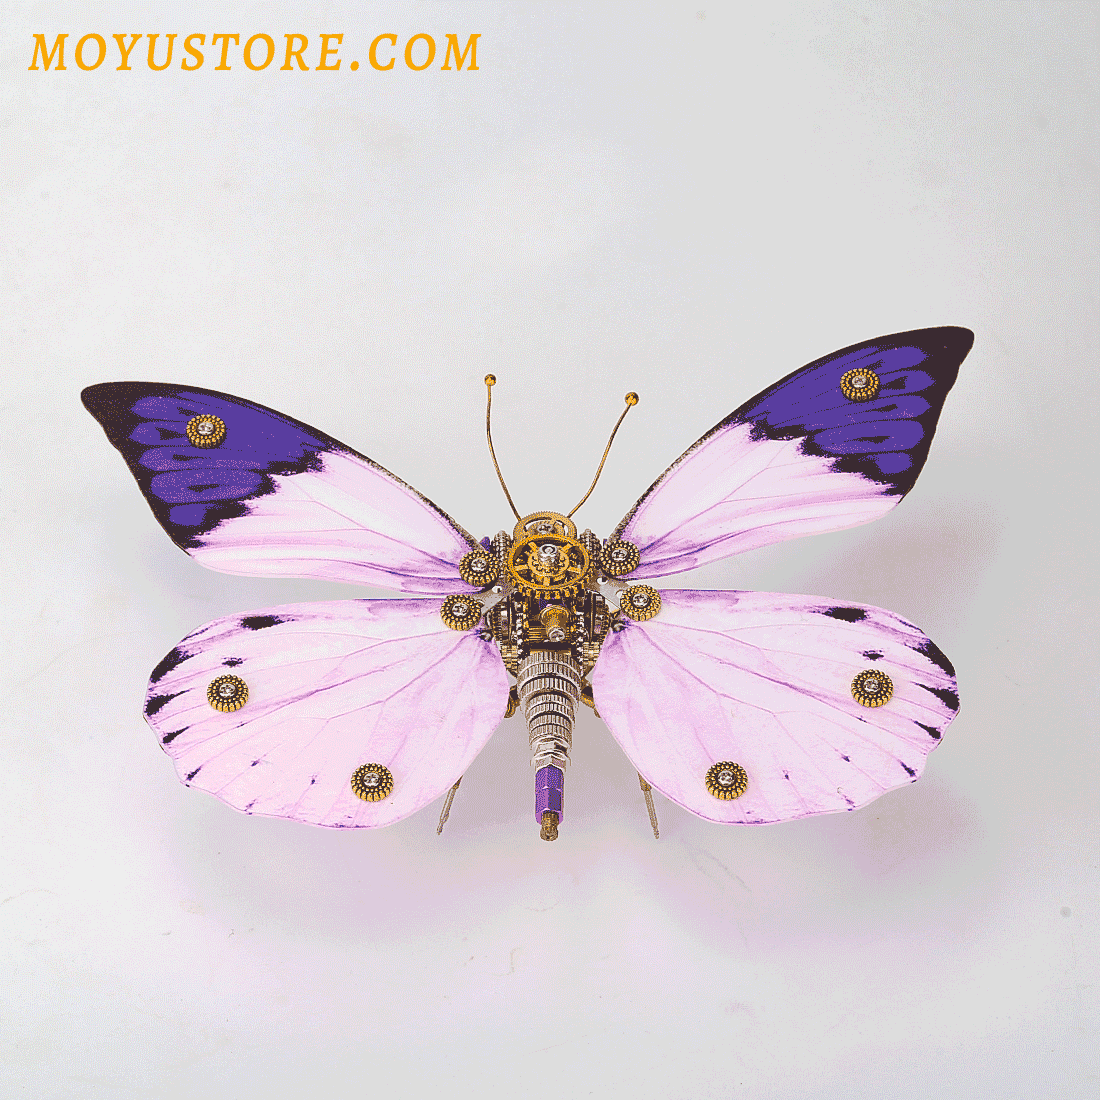 8 Steampunk Butterfly Colors Meanings and Symbolism